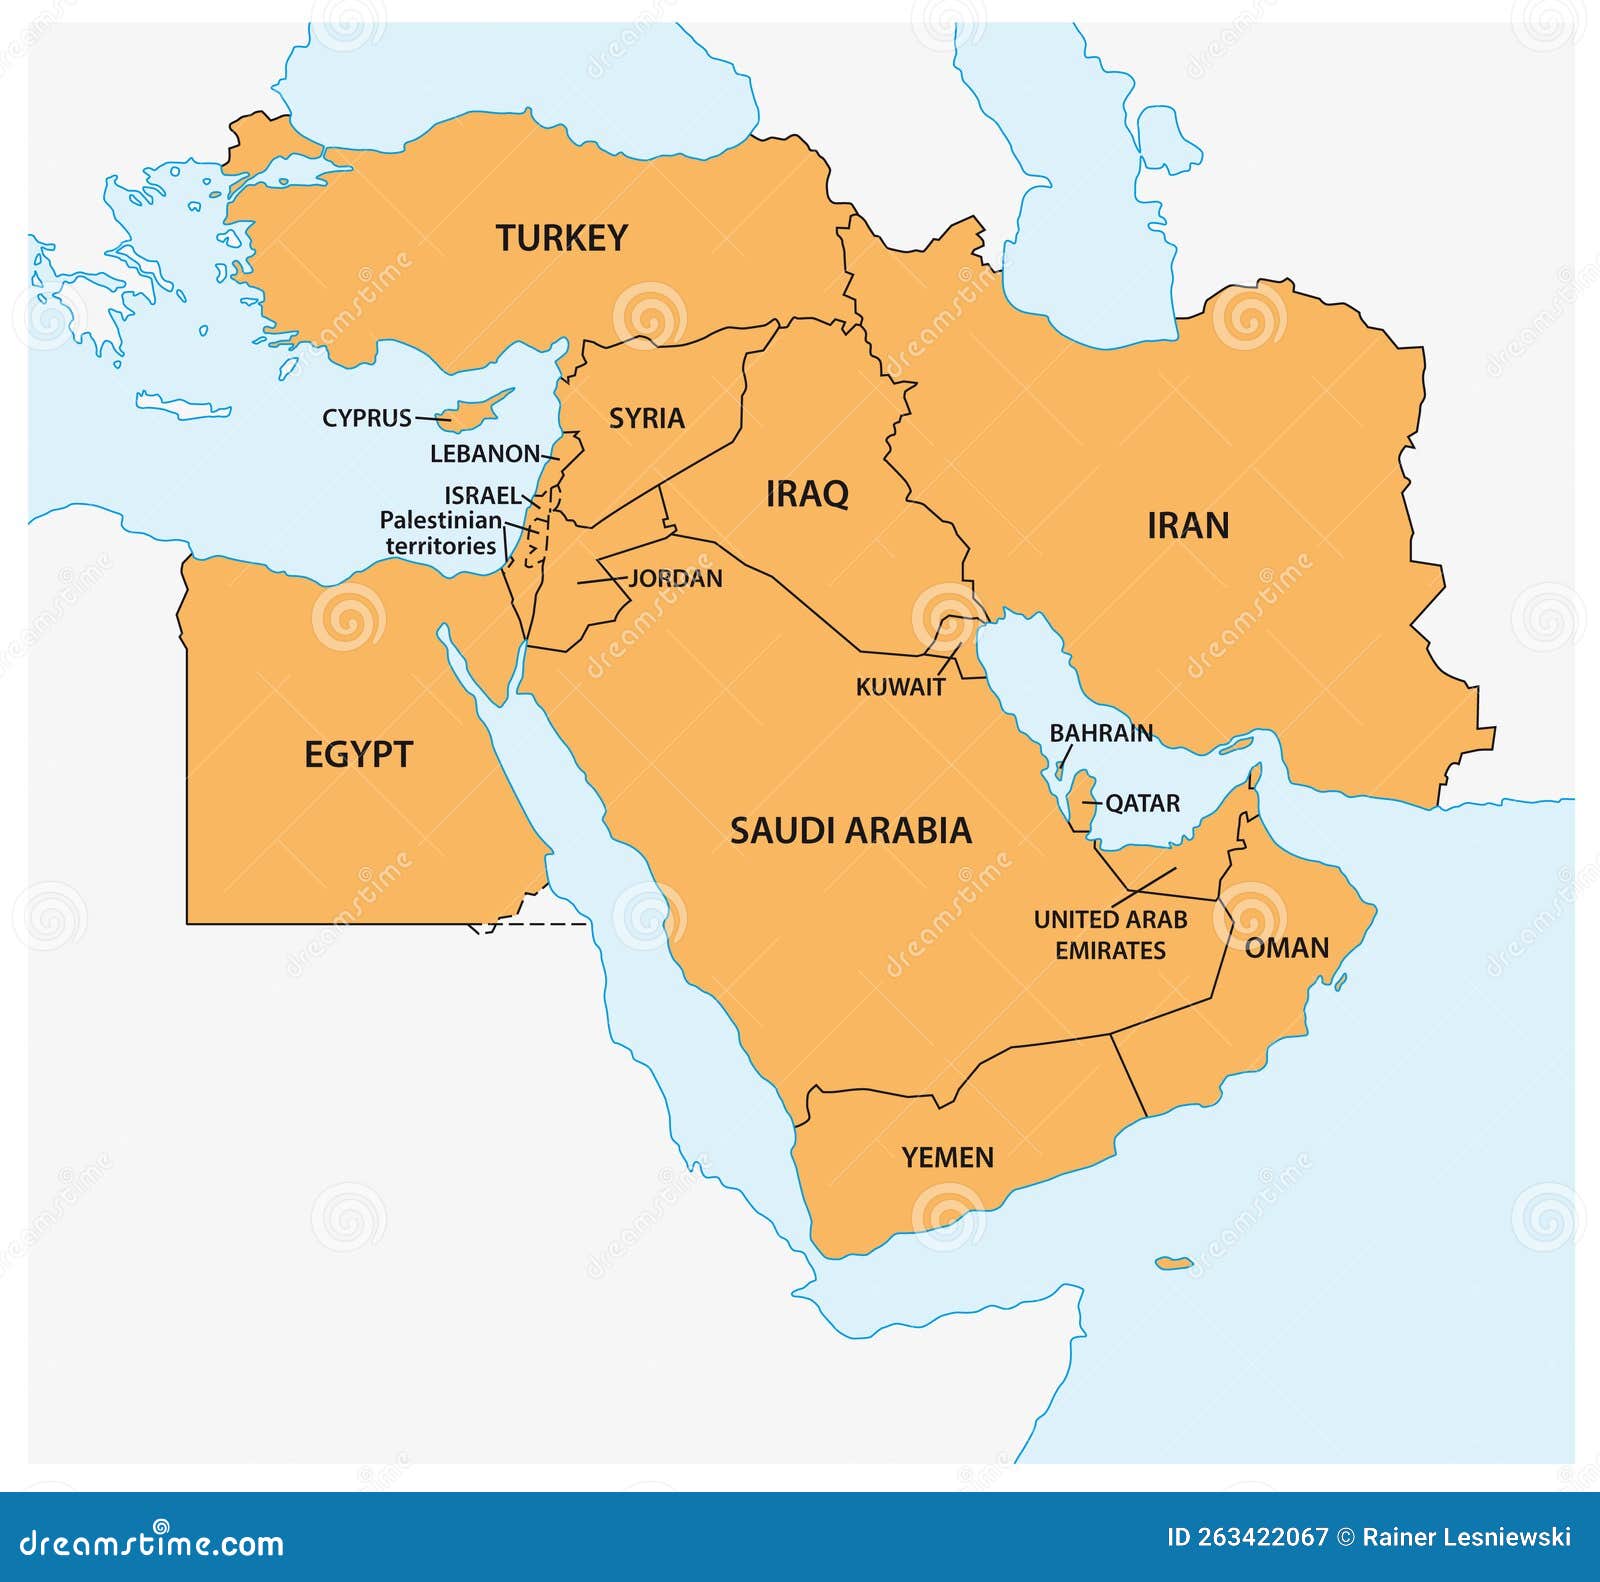  map of geopolitical region middle east